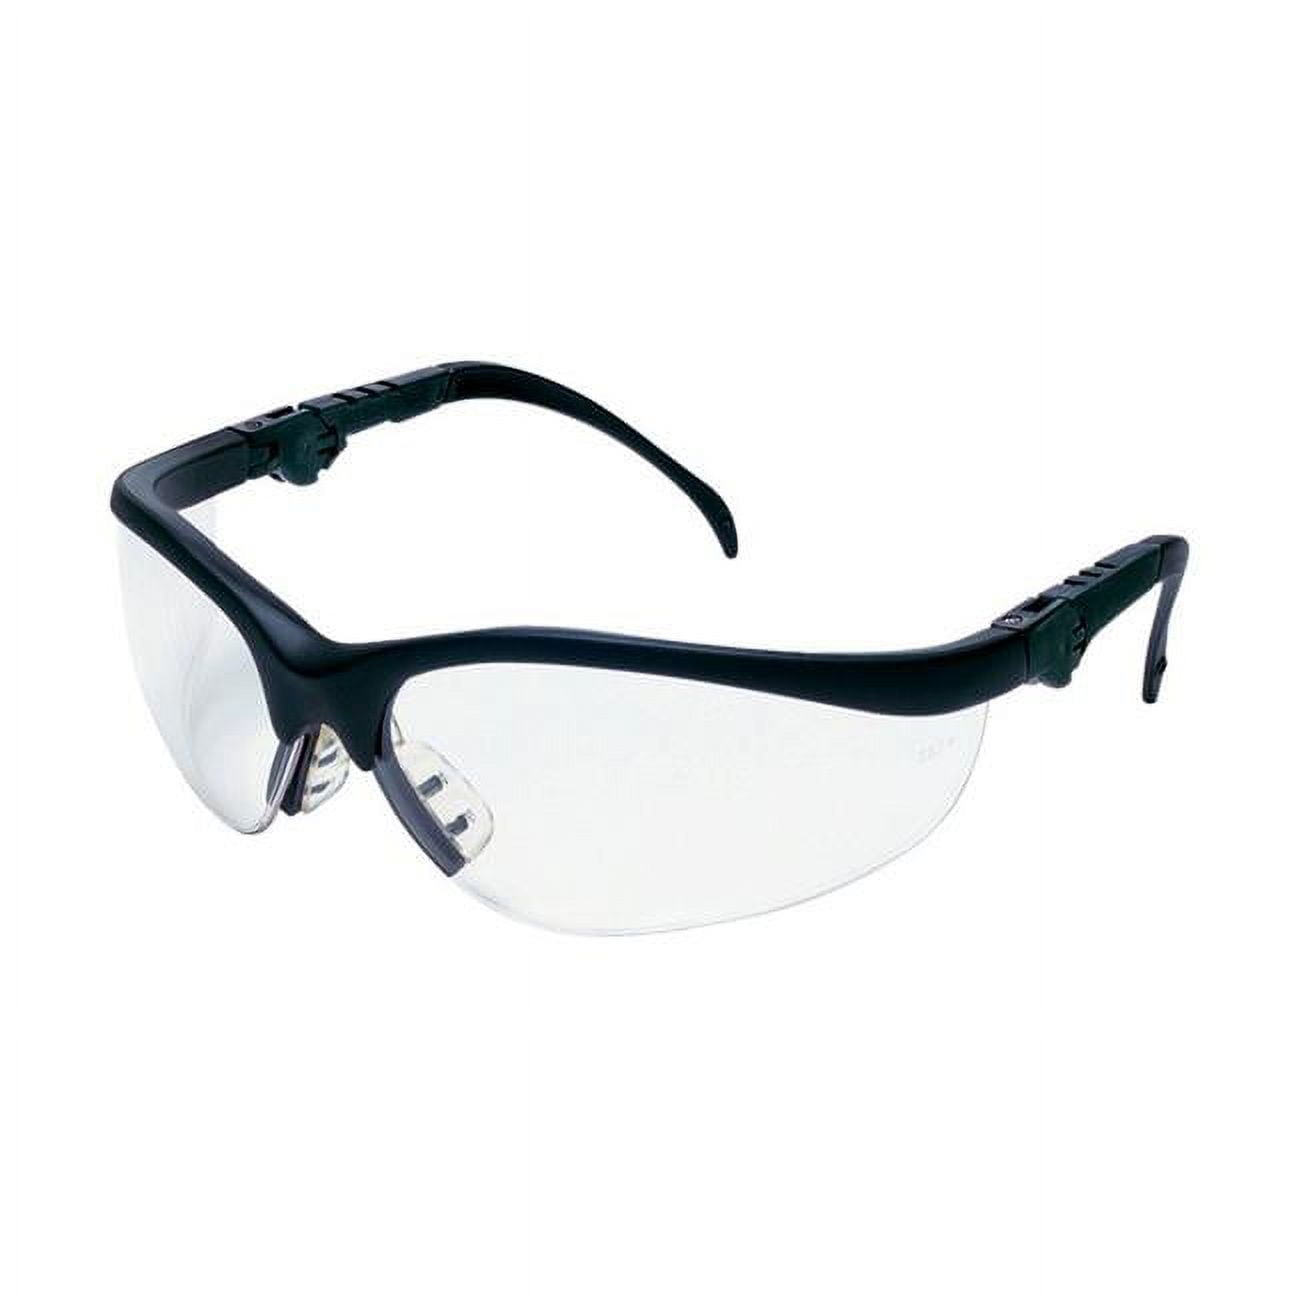 Mcr 2418317 Safety Glasses Clear Lens With Black Frame With Clear Lens - Pack Of 12